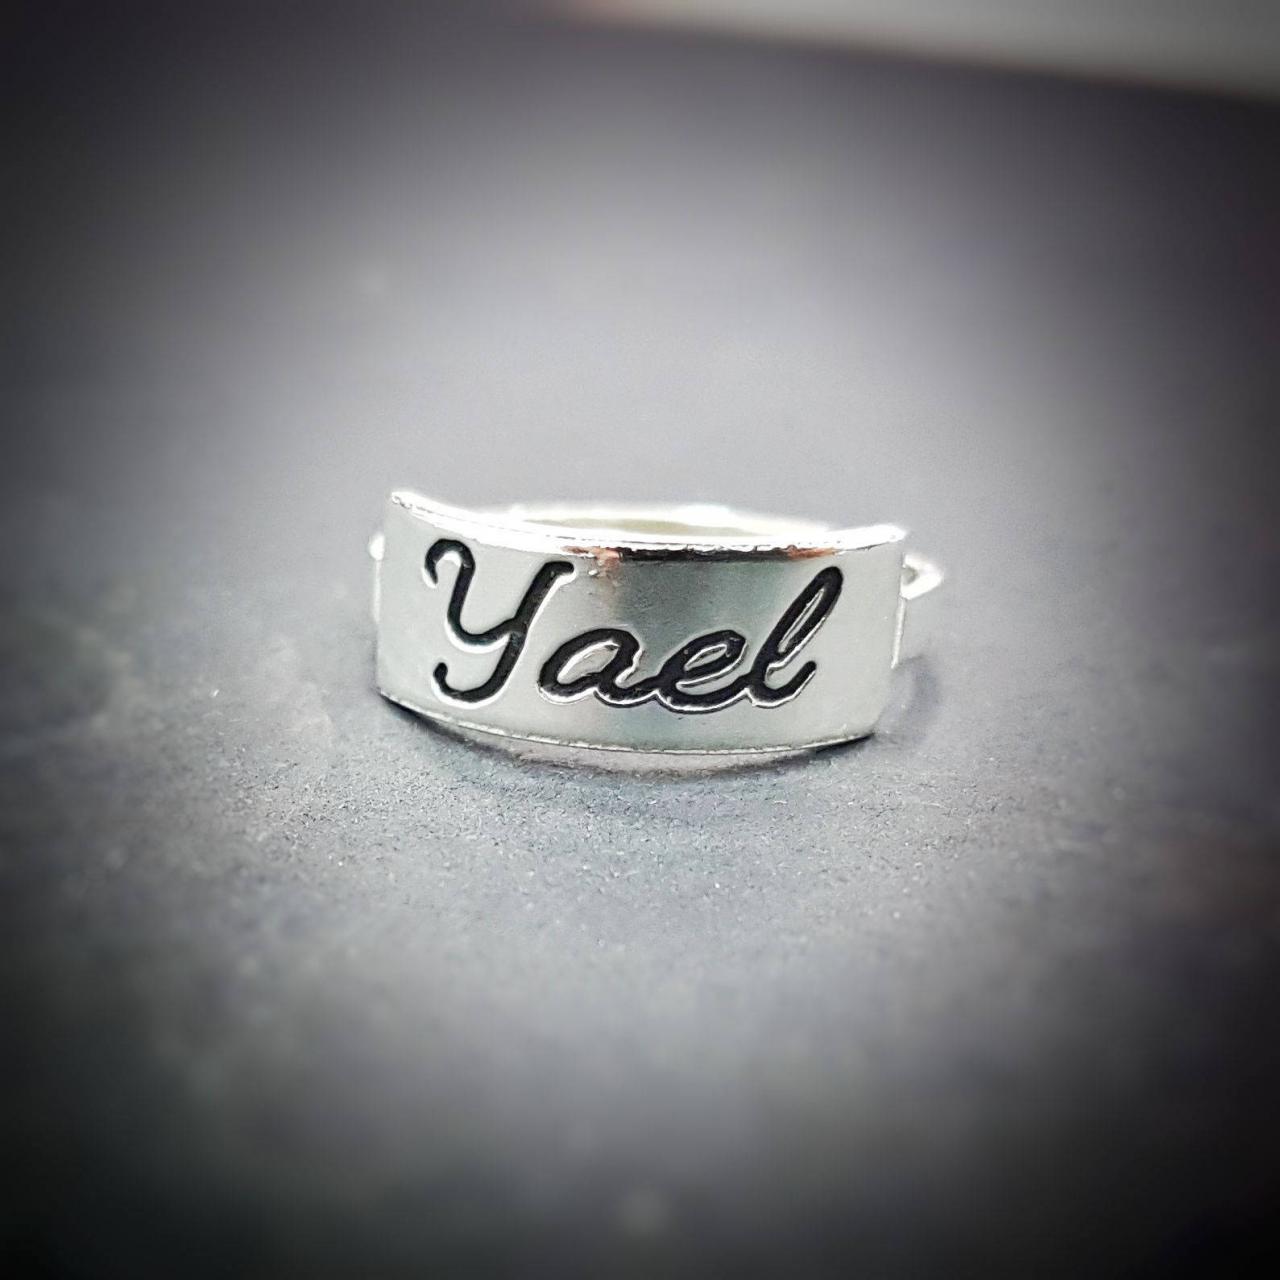 Personalized Ring - Custom Ring - Engraved Ring - Personalized Jewelry - Personalized Gift - Personalized Letter Ring - Sterling Silver Initials